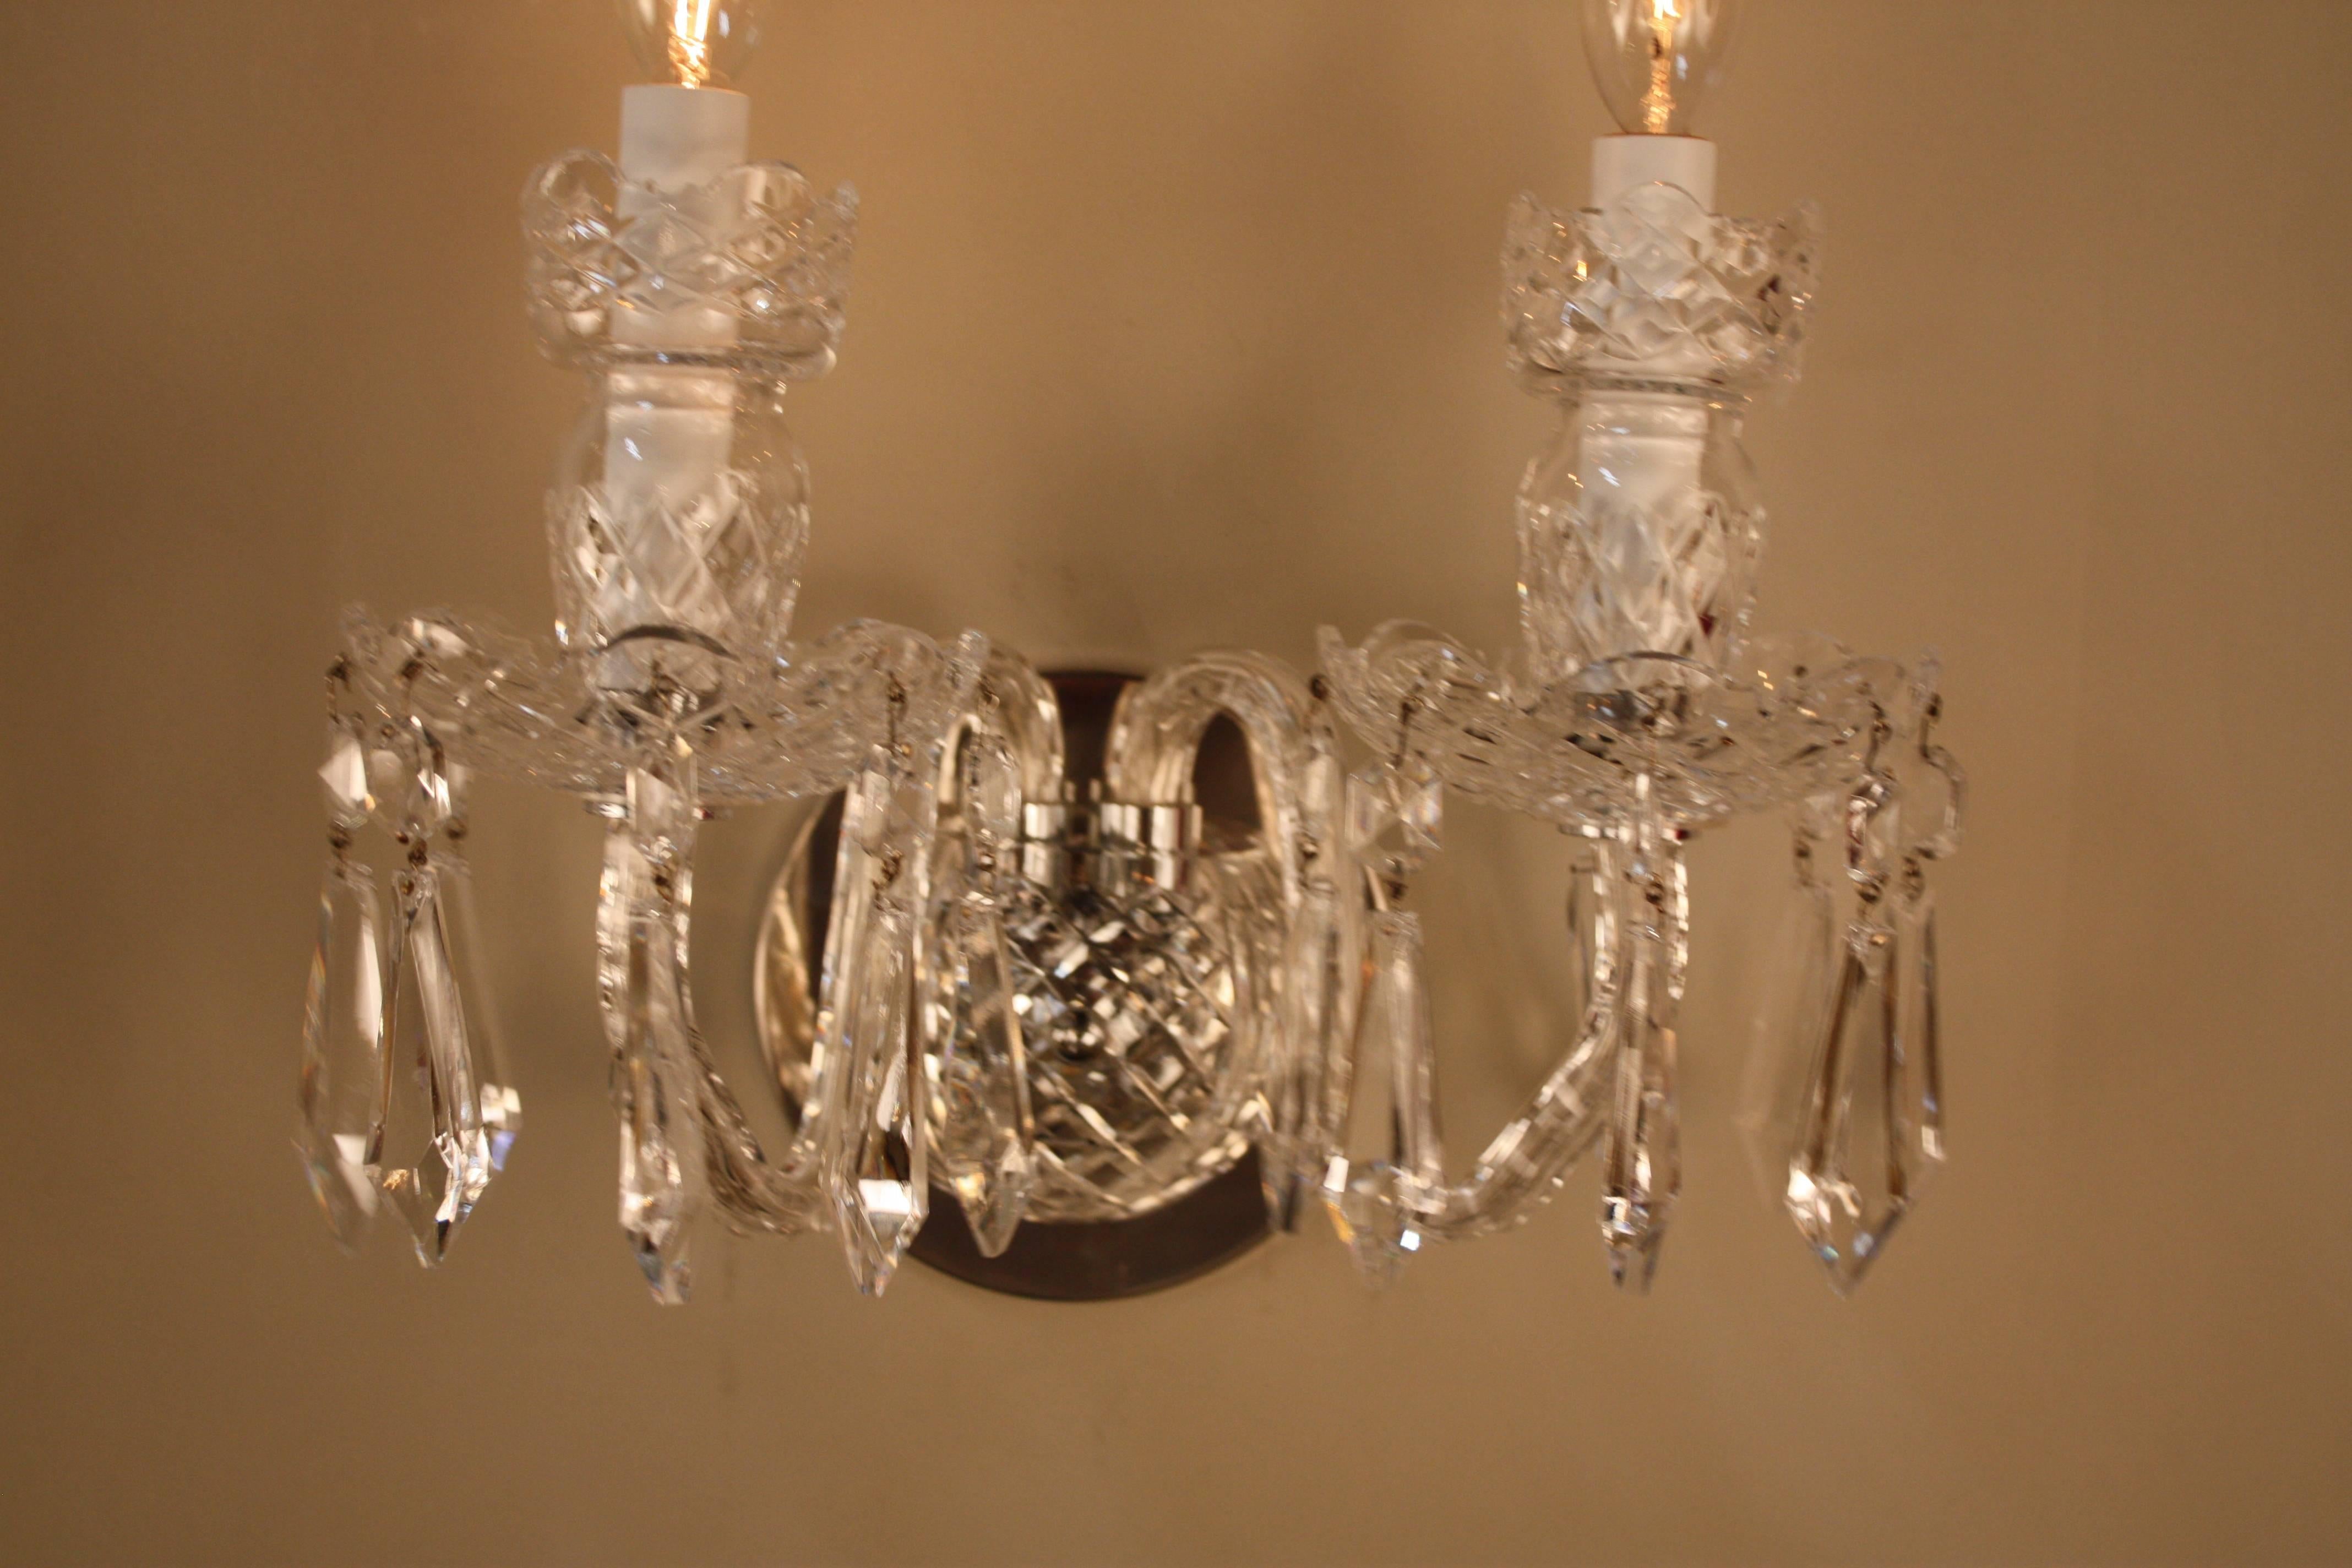 Pair of Classic design double arm Waterford Crystal wall sconces.
 